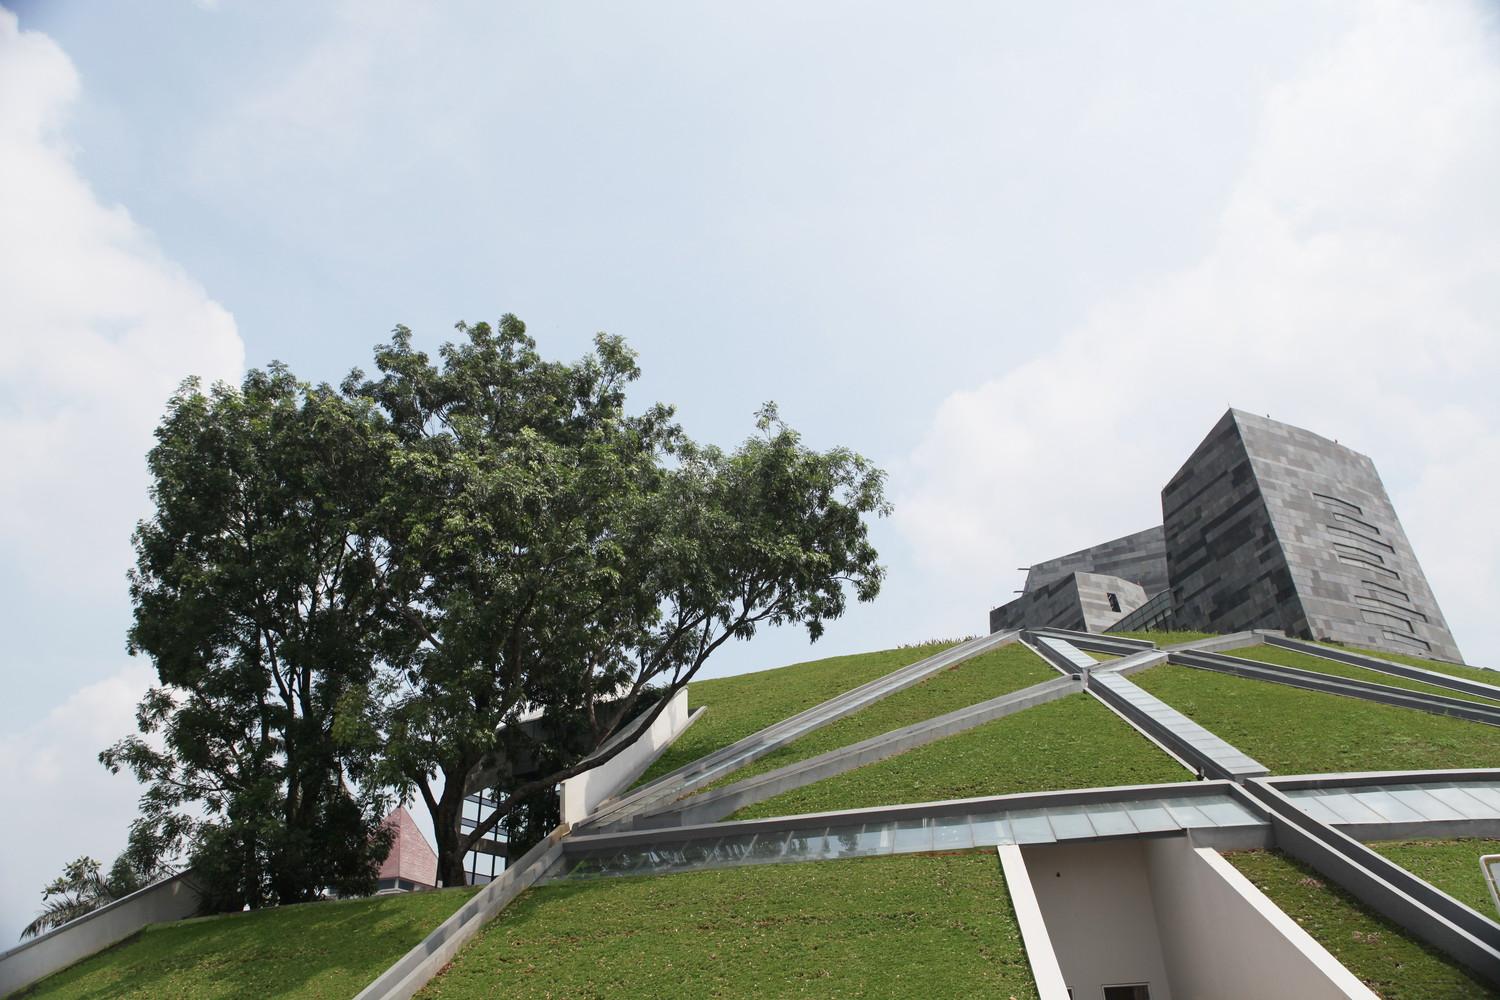 Central Library University - The circular grass - covered Earth mound with the existing trees